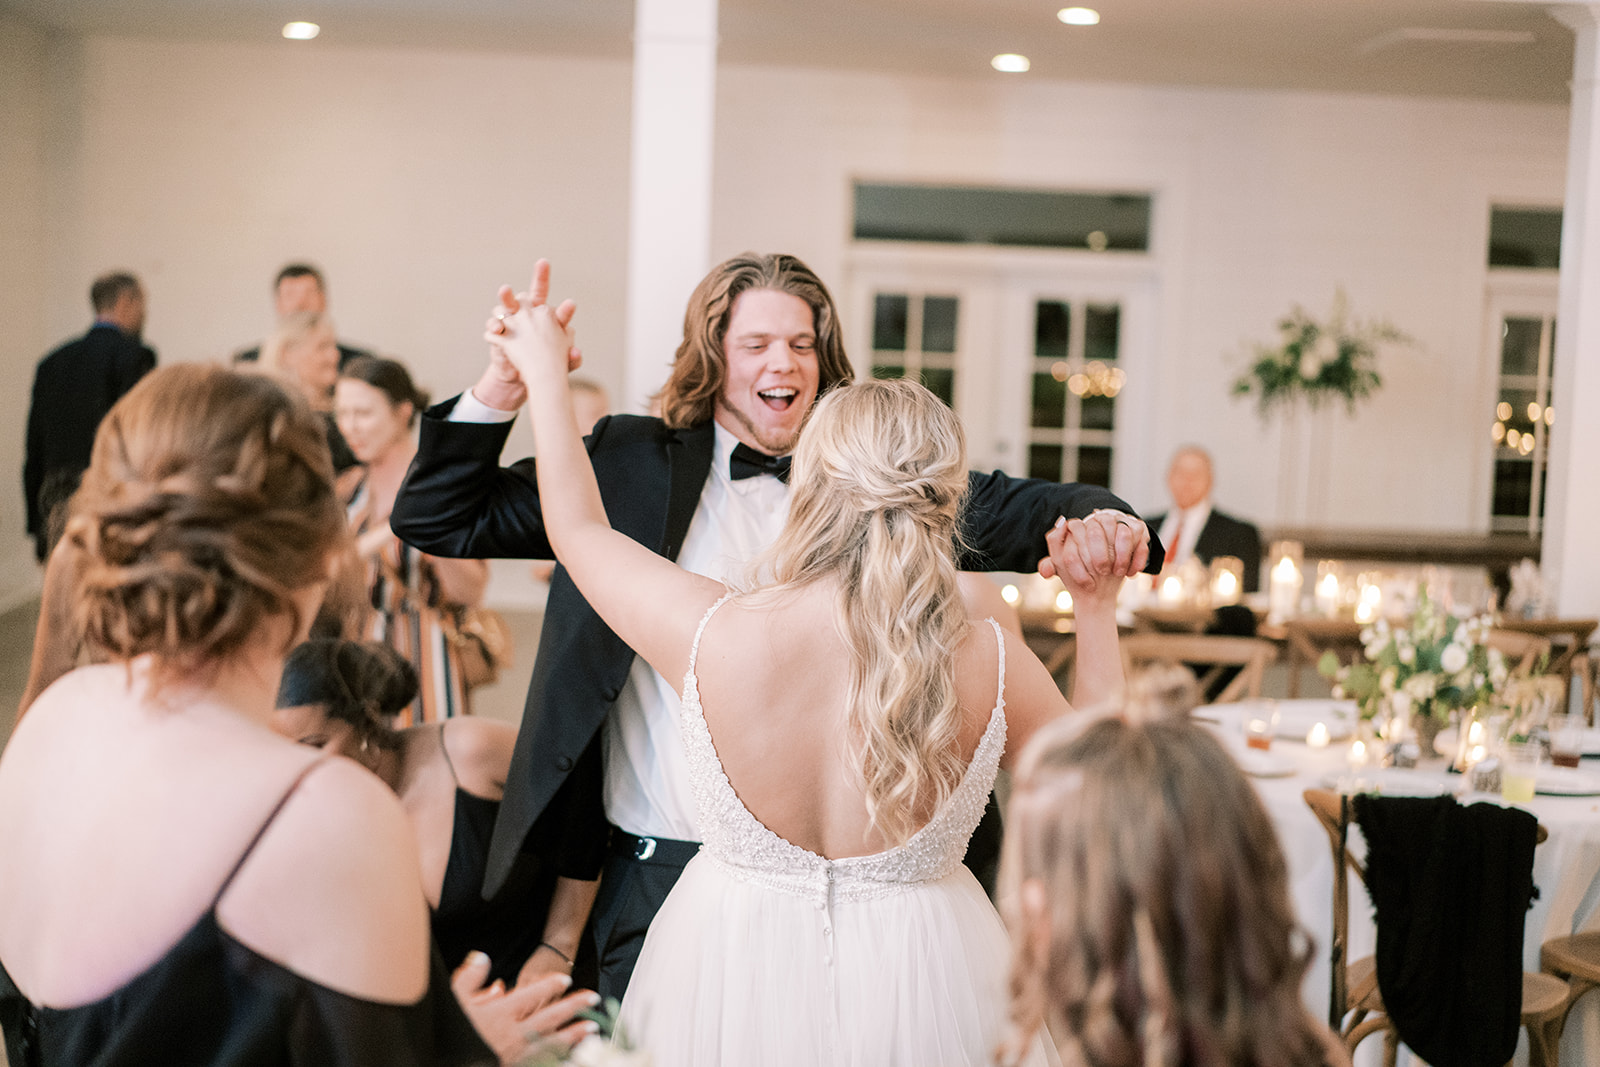 The bride and groom dance at their reception at Harvest Hollow in Huntsville, Alabama